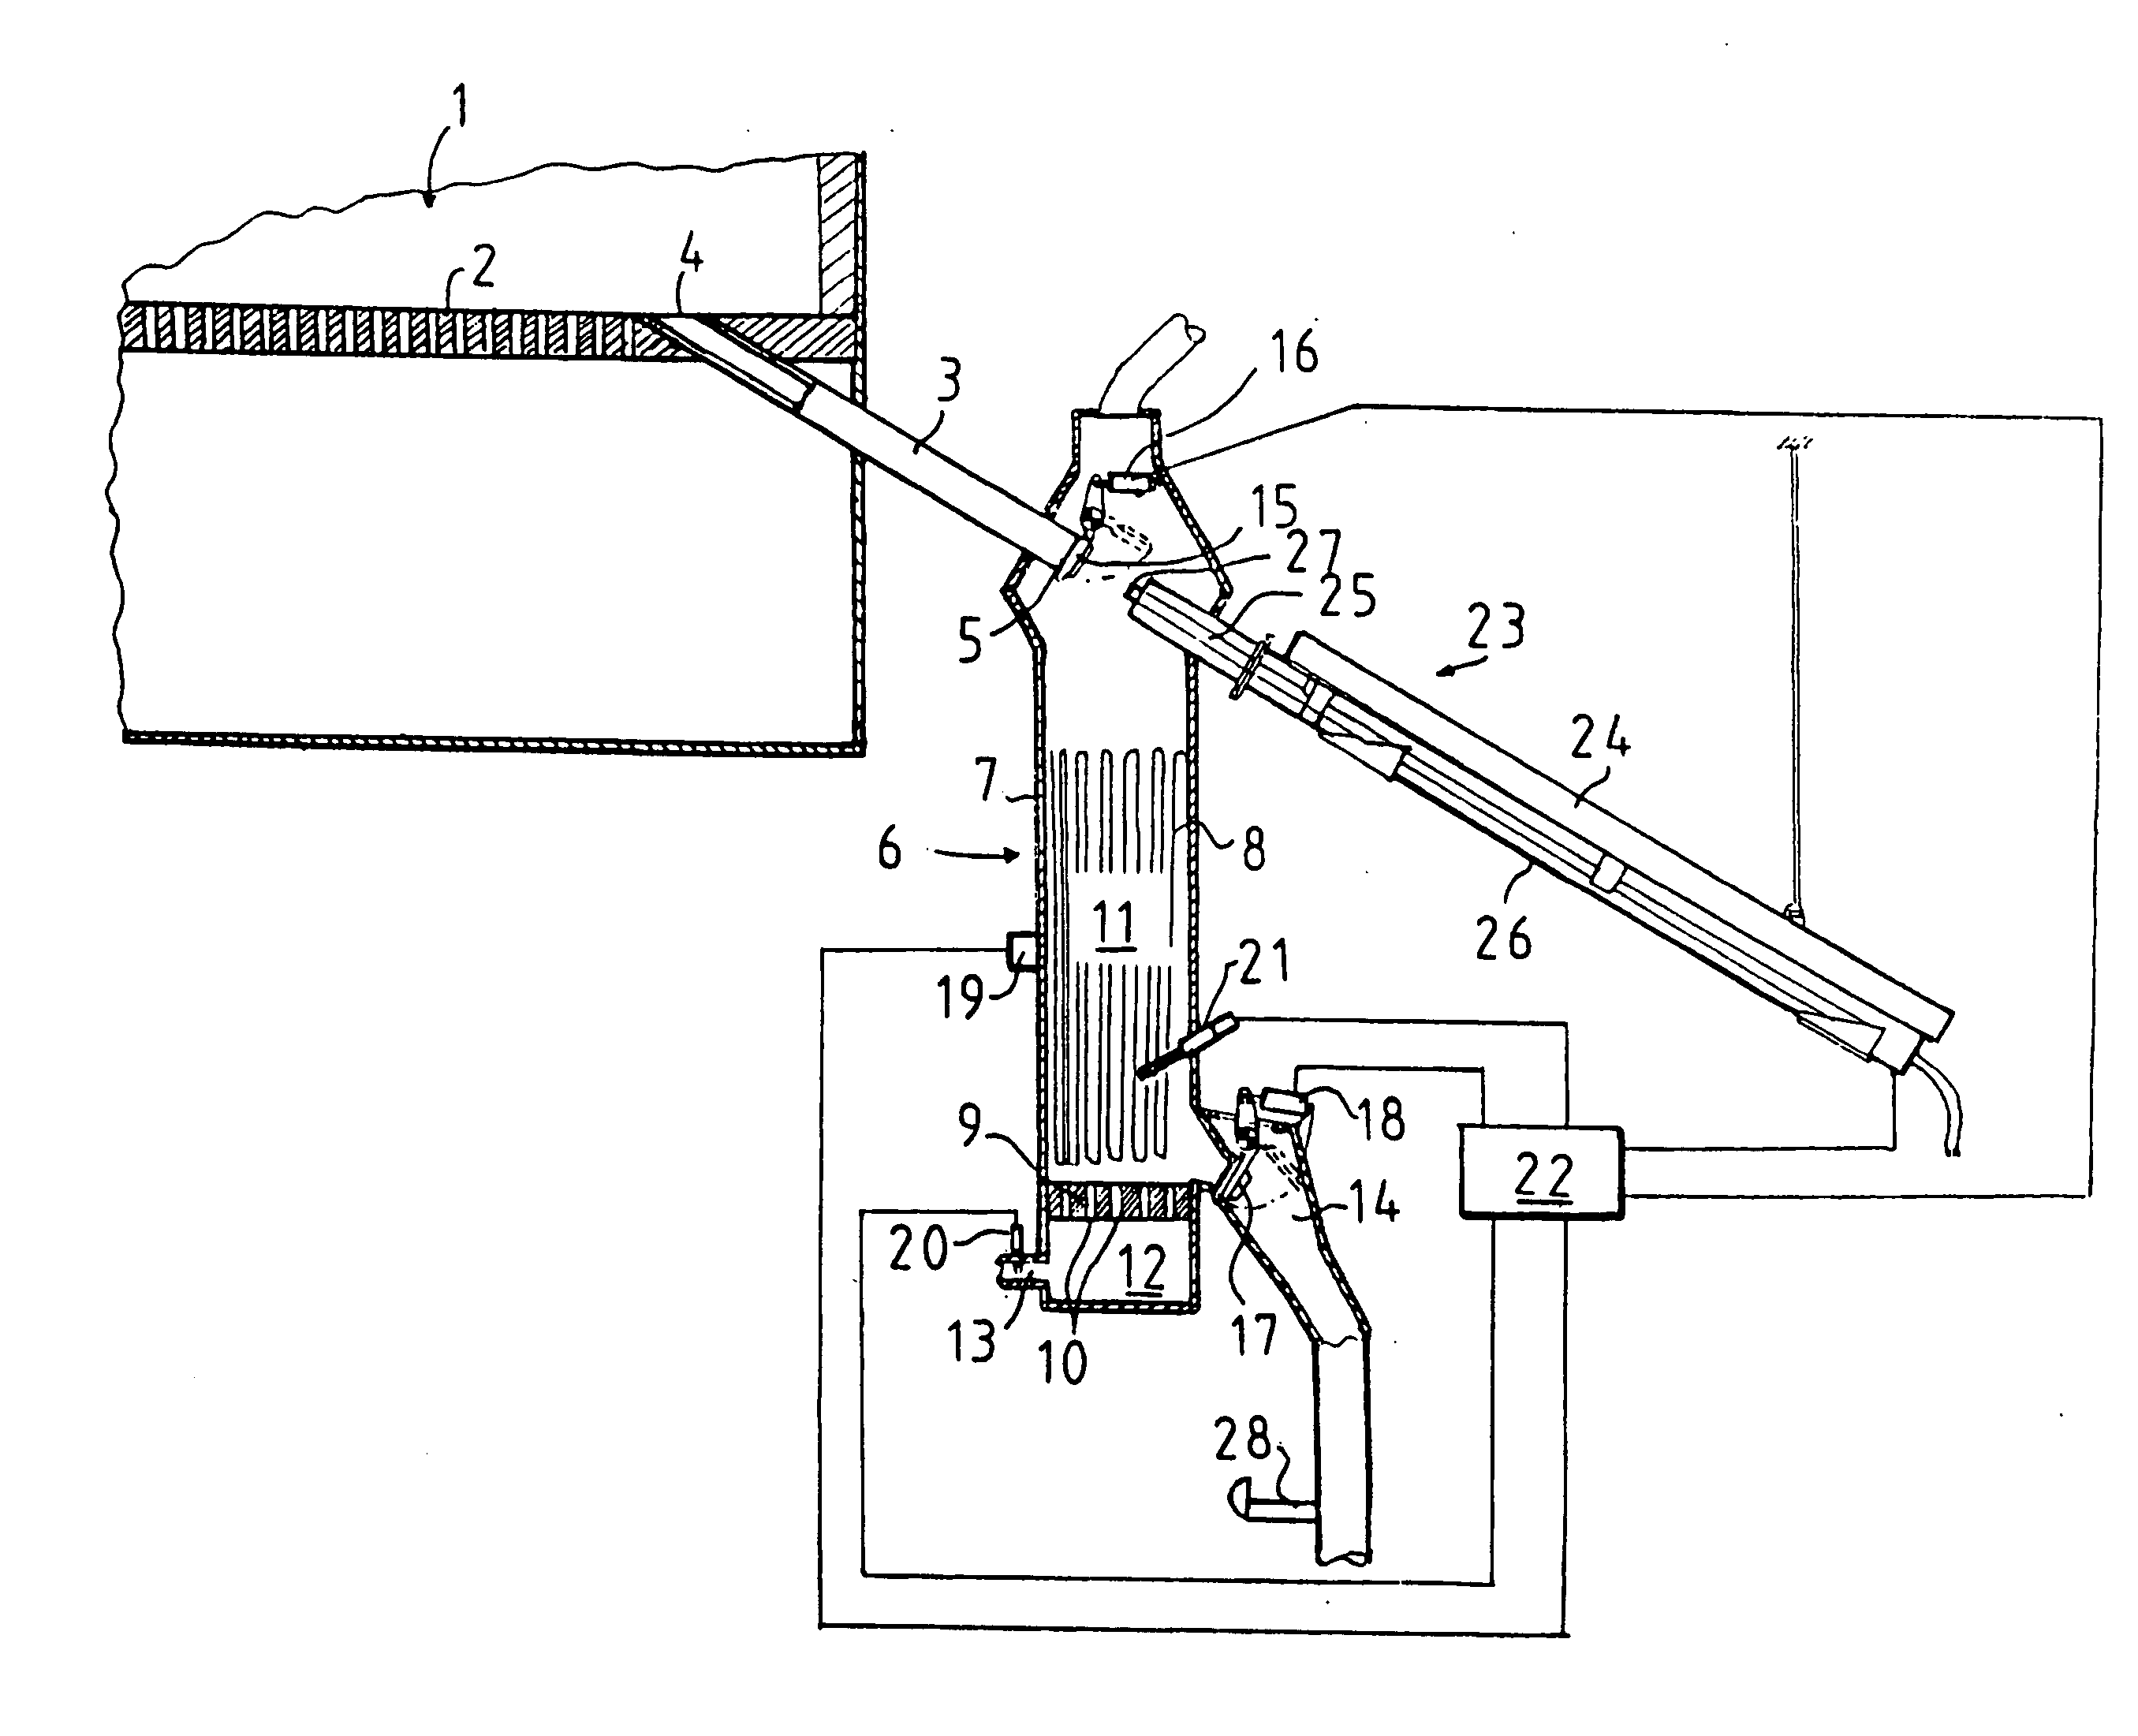 Method And Apparatus For Cooling A Material To Be Removed From The Grate Of A Fluidized Bed Furnace